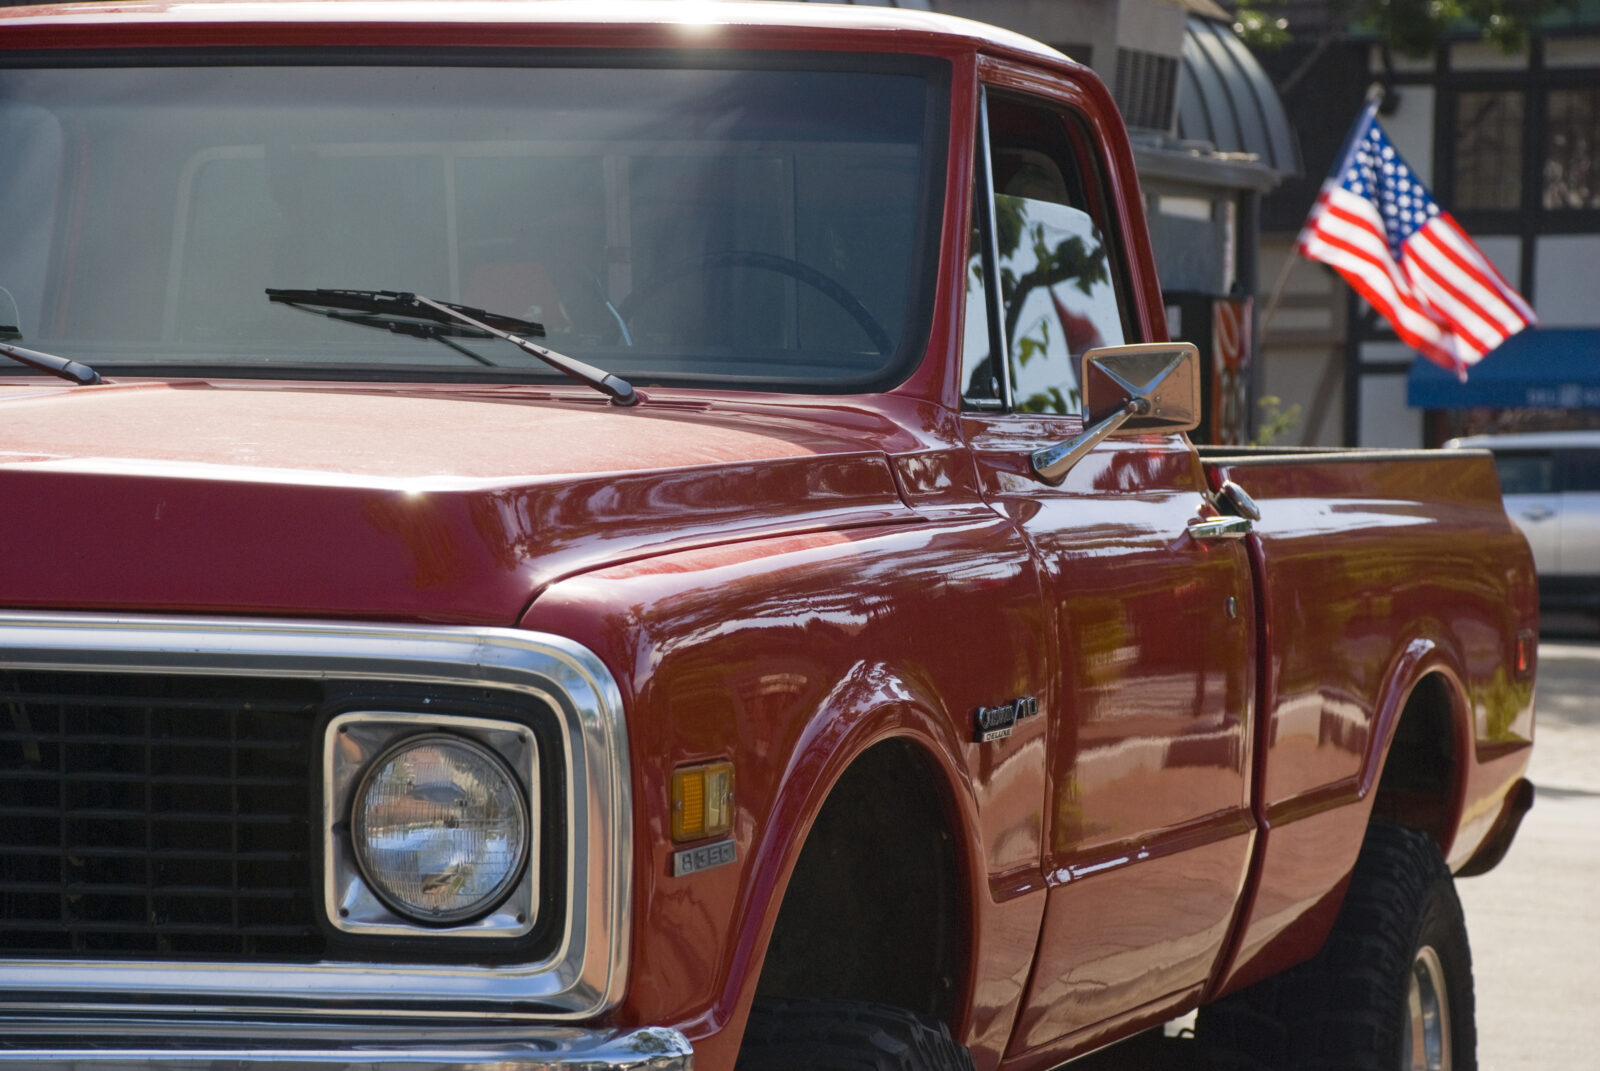 Patriotism: Old red American Pickup truck with flag at the rear end